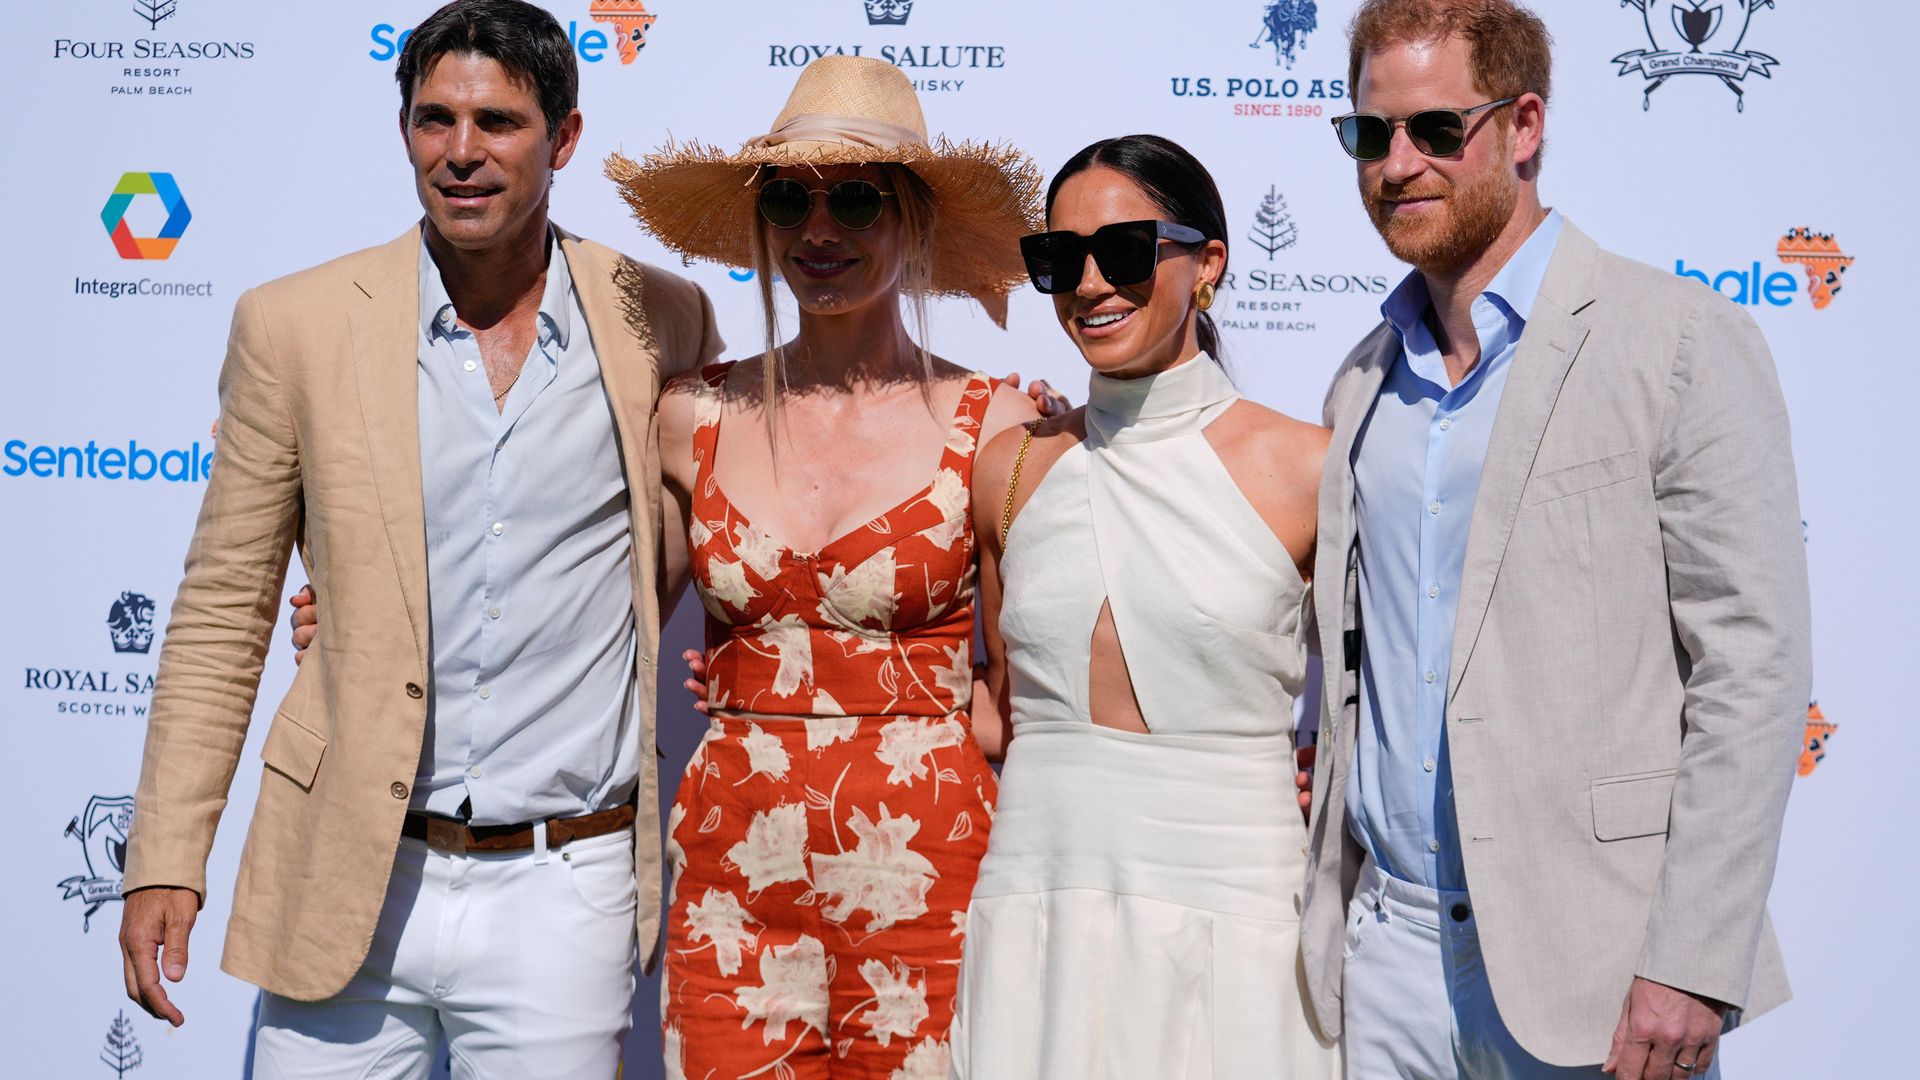 Prince Harry and Meghan Markle pose for photos with Argentine professional polo player Ignacio "Nacho" Figueras, and his wife Delfina Blaquier 